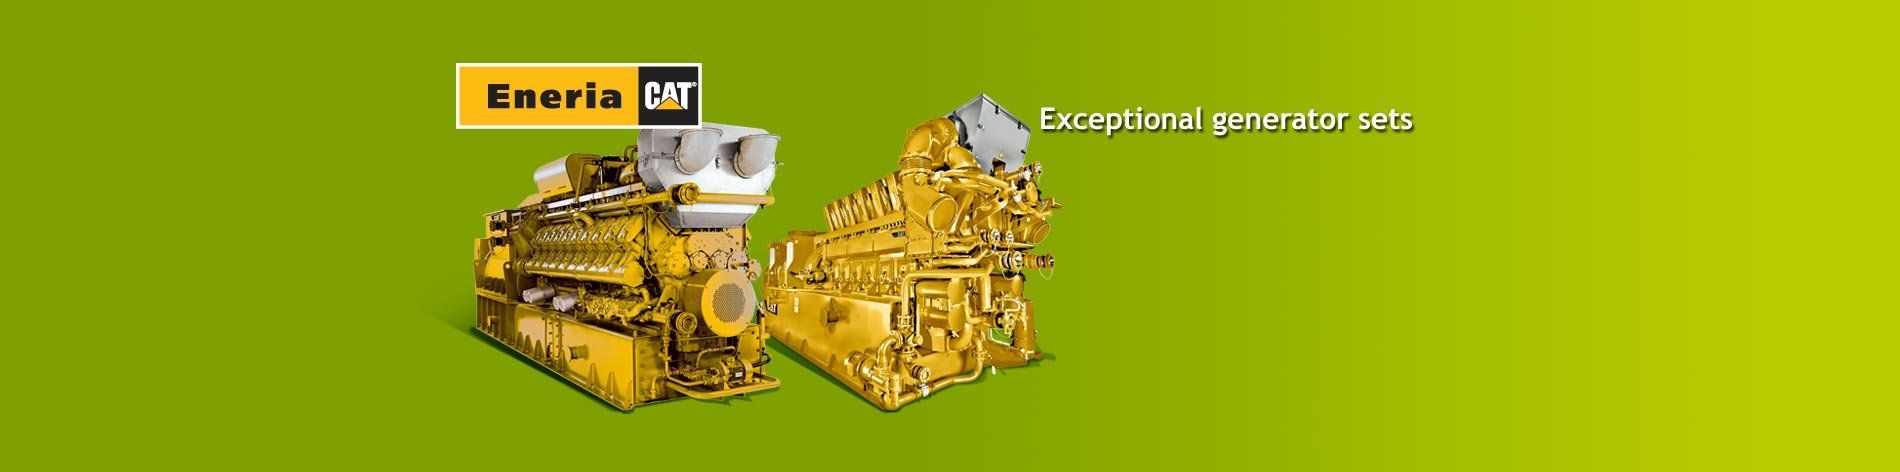 We offer a complete line of gas generator sets adapted for any type of gas with outputs from 130 kWe to 4,300 kWe.